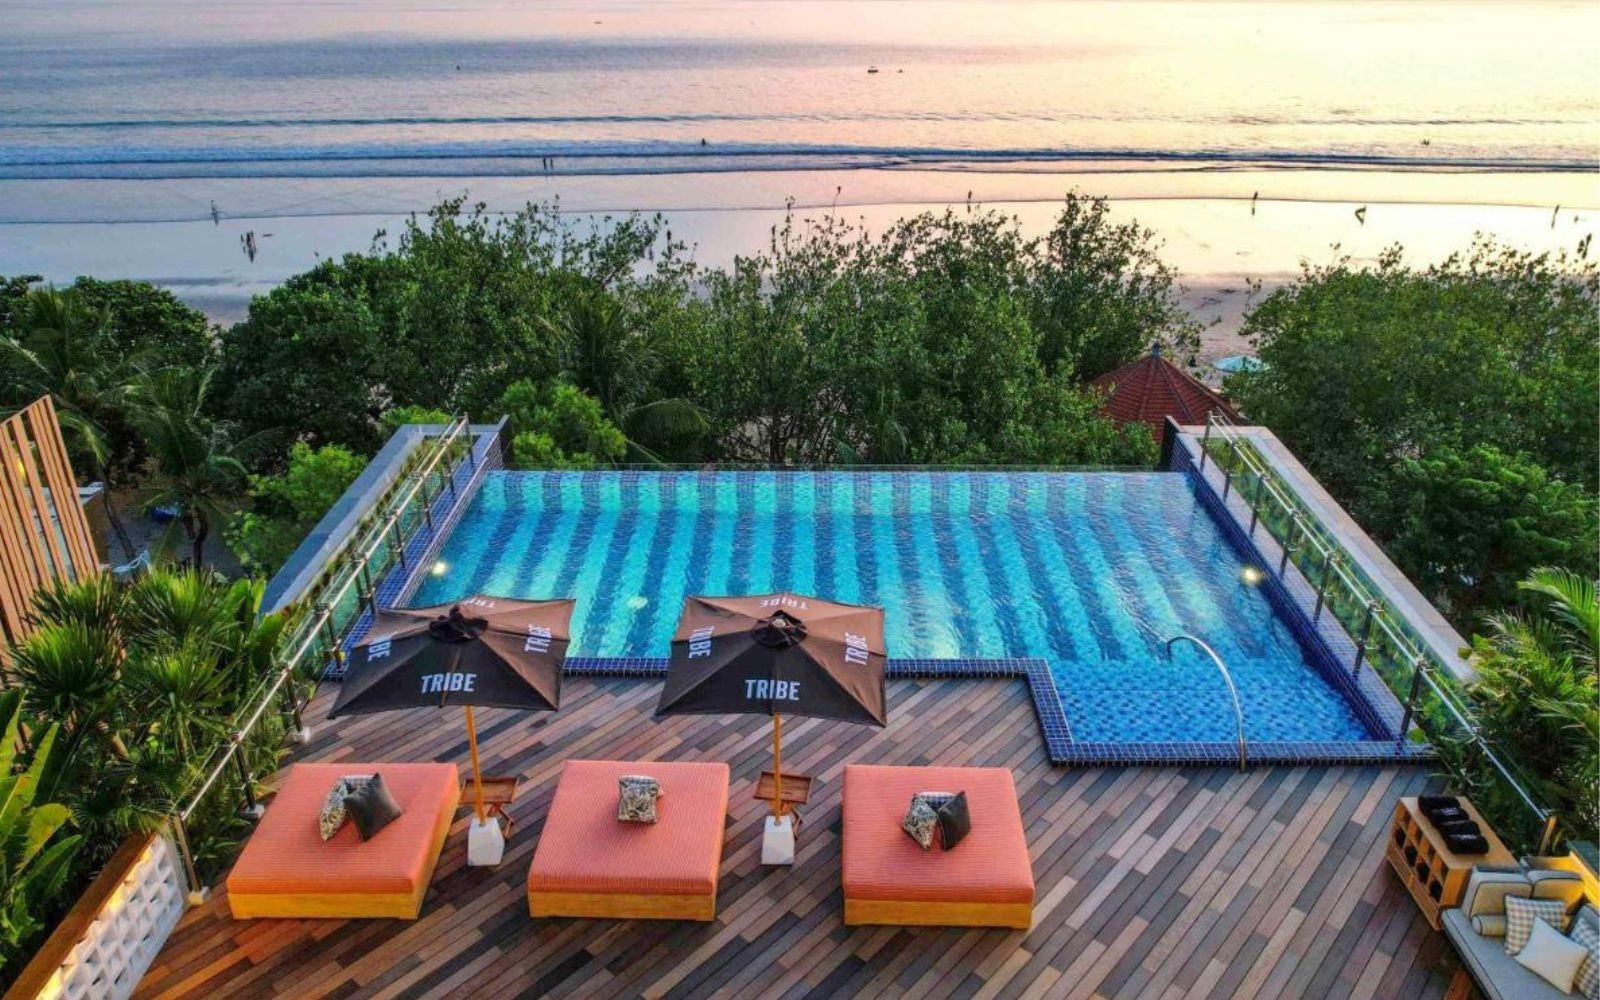 TRIBE Opens A Coliving Boutique Hotel In Bali